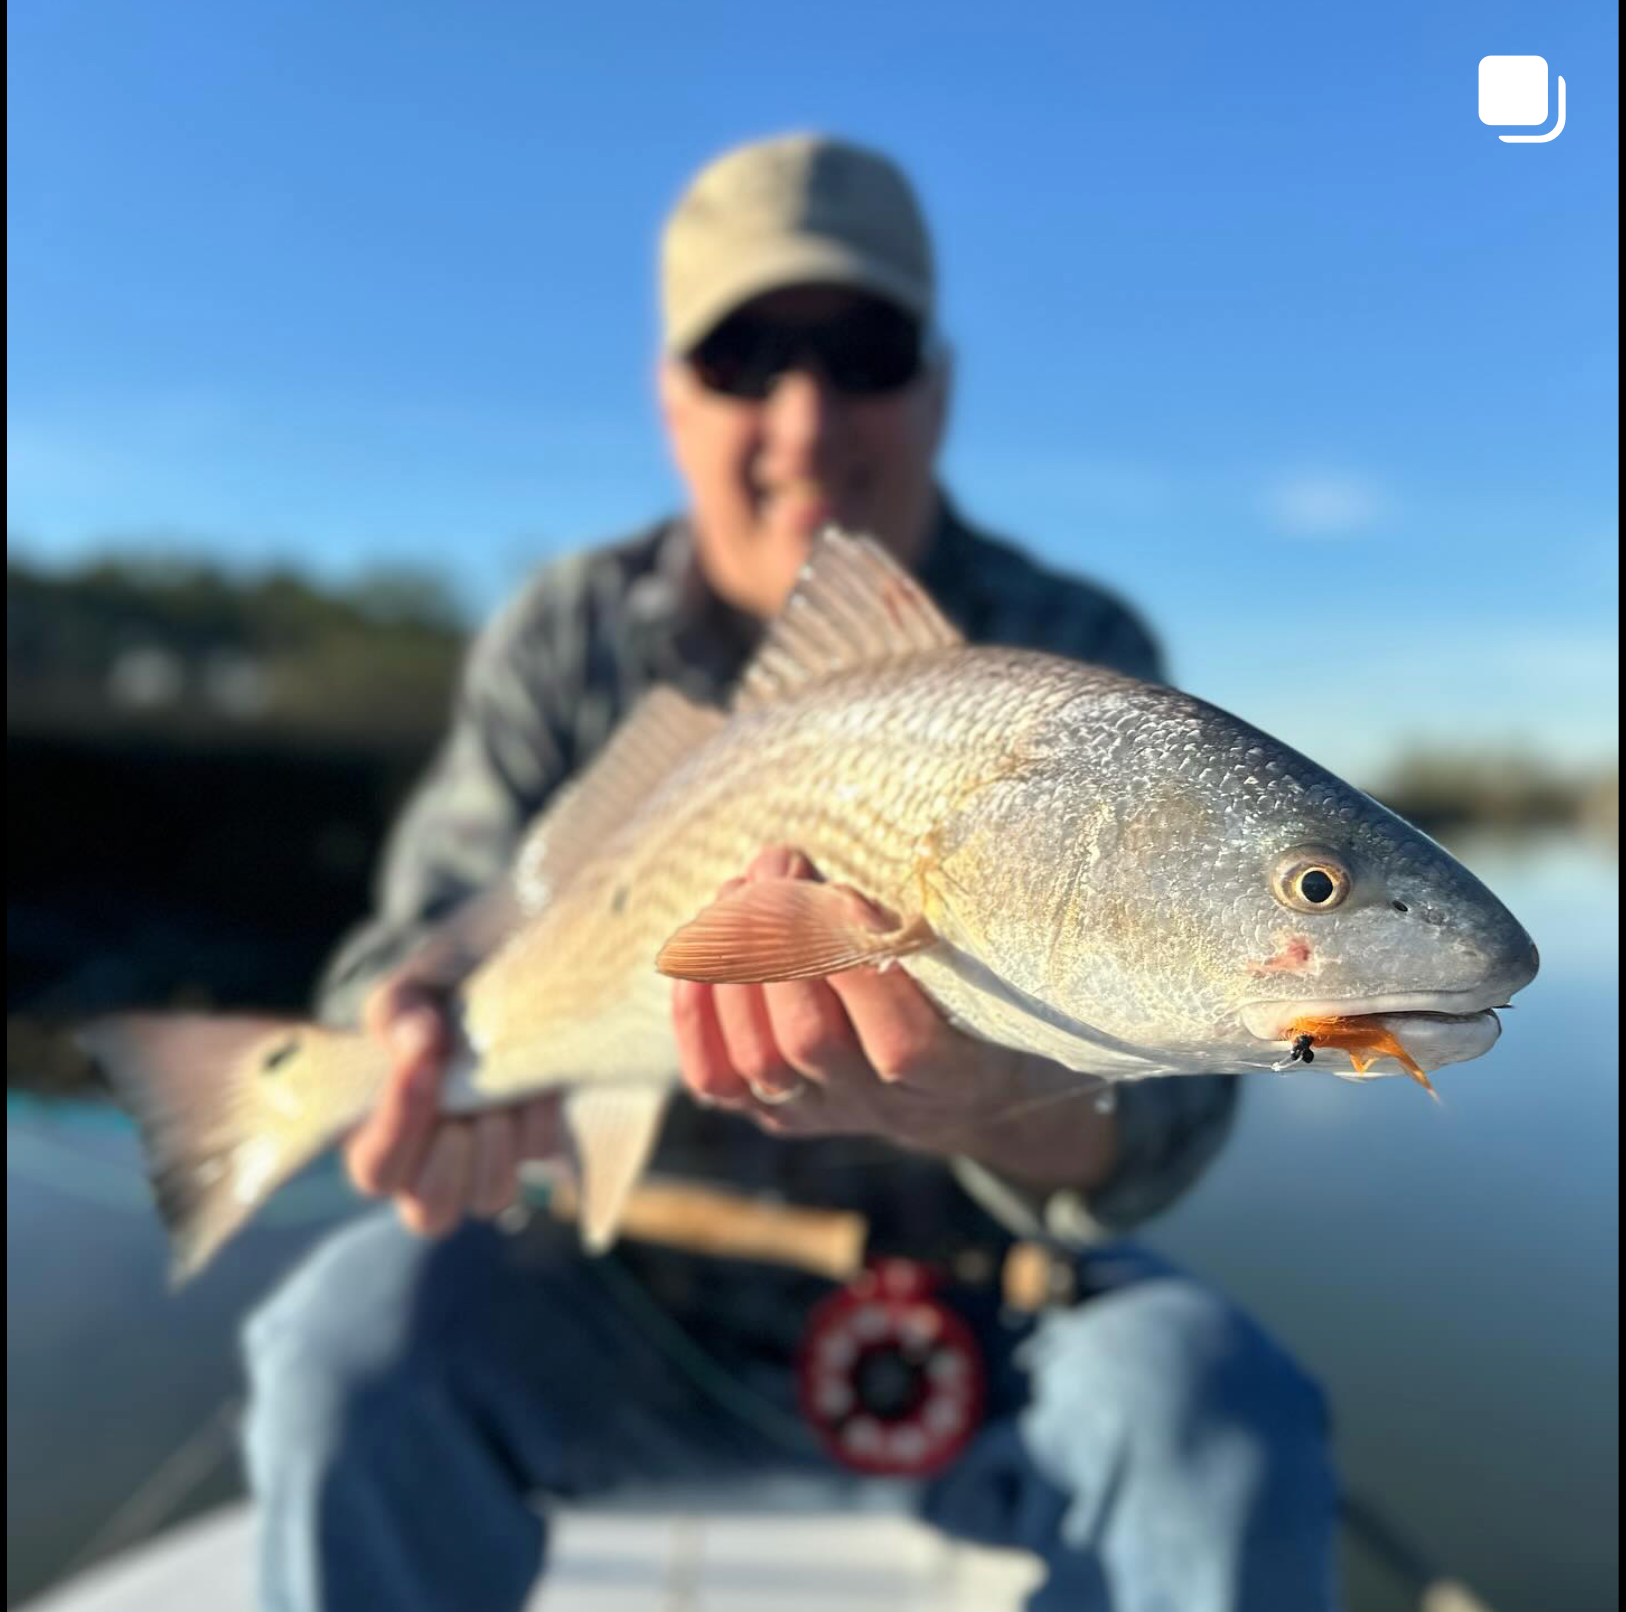 Another happy client catching their 🥇 1st redfish on fly!